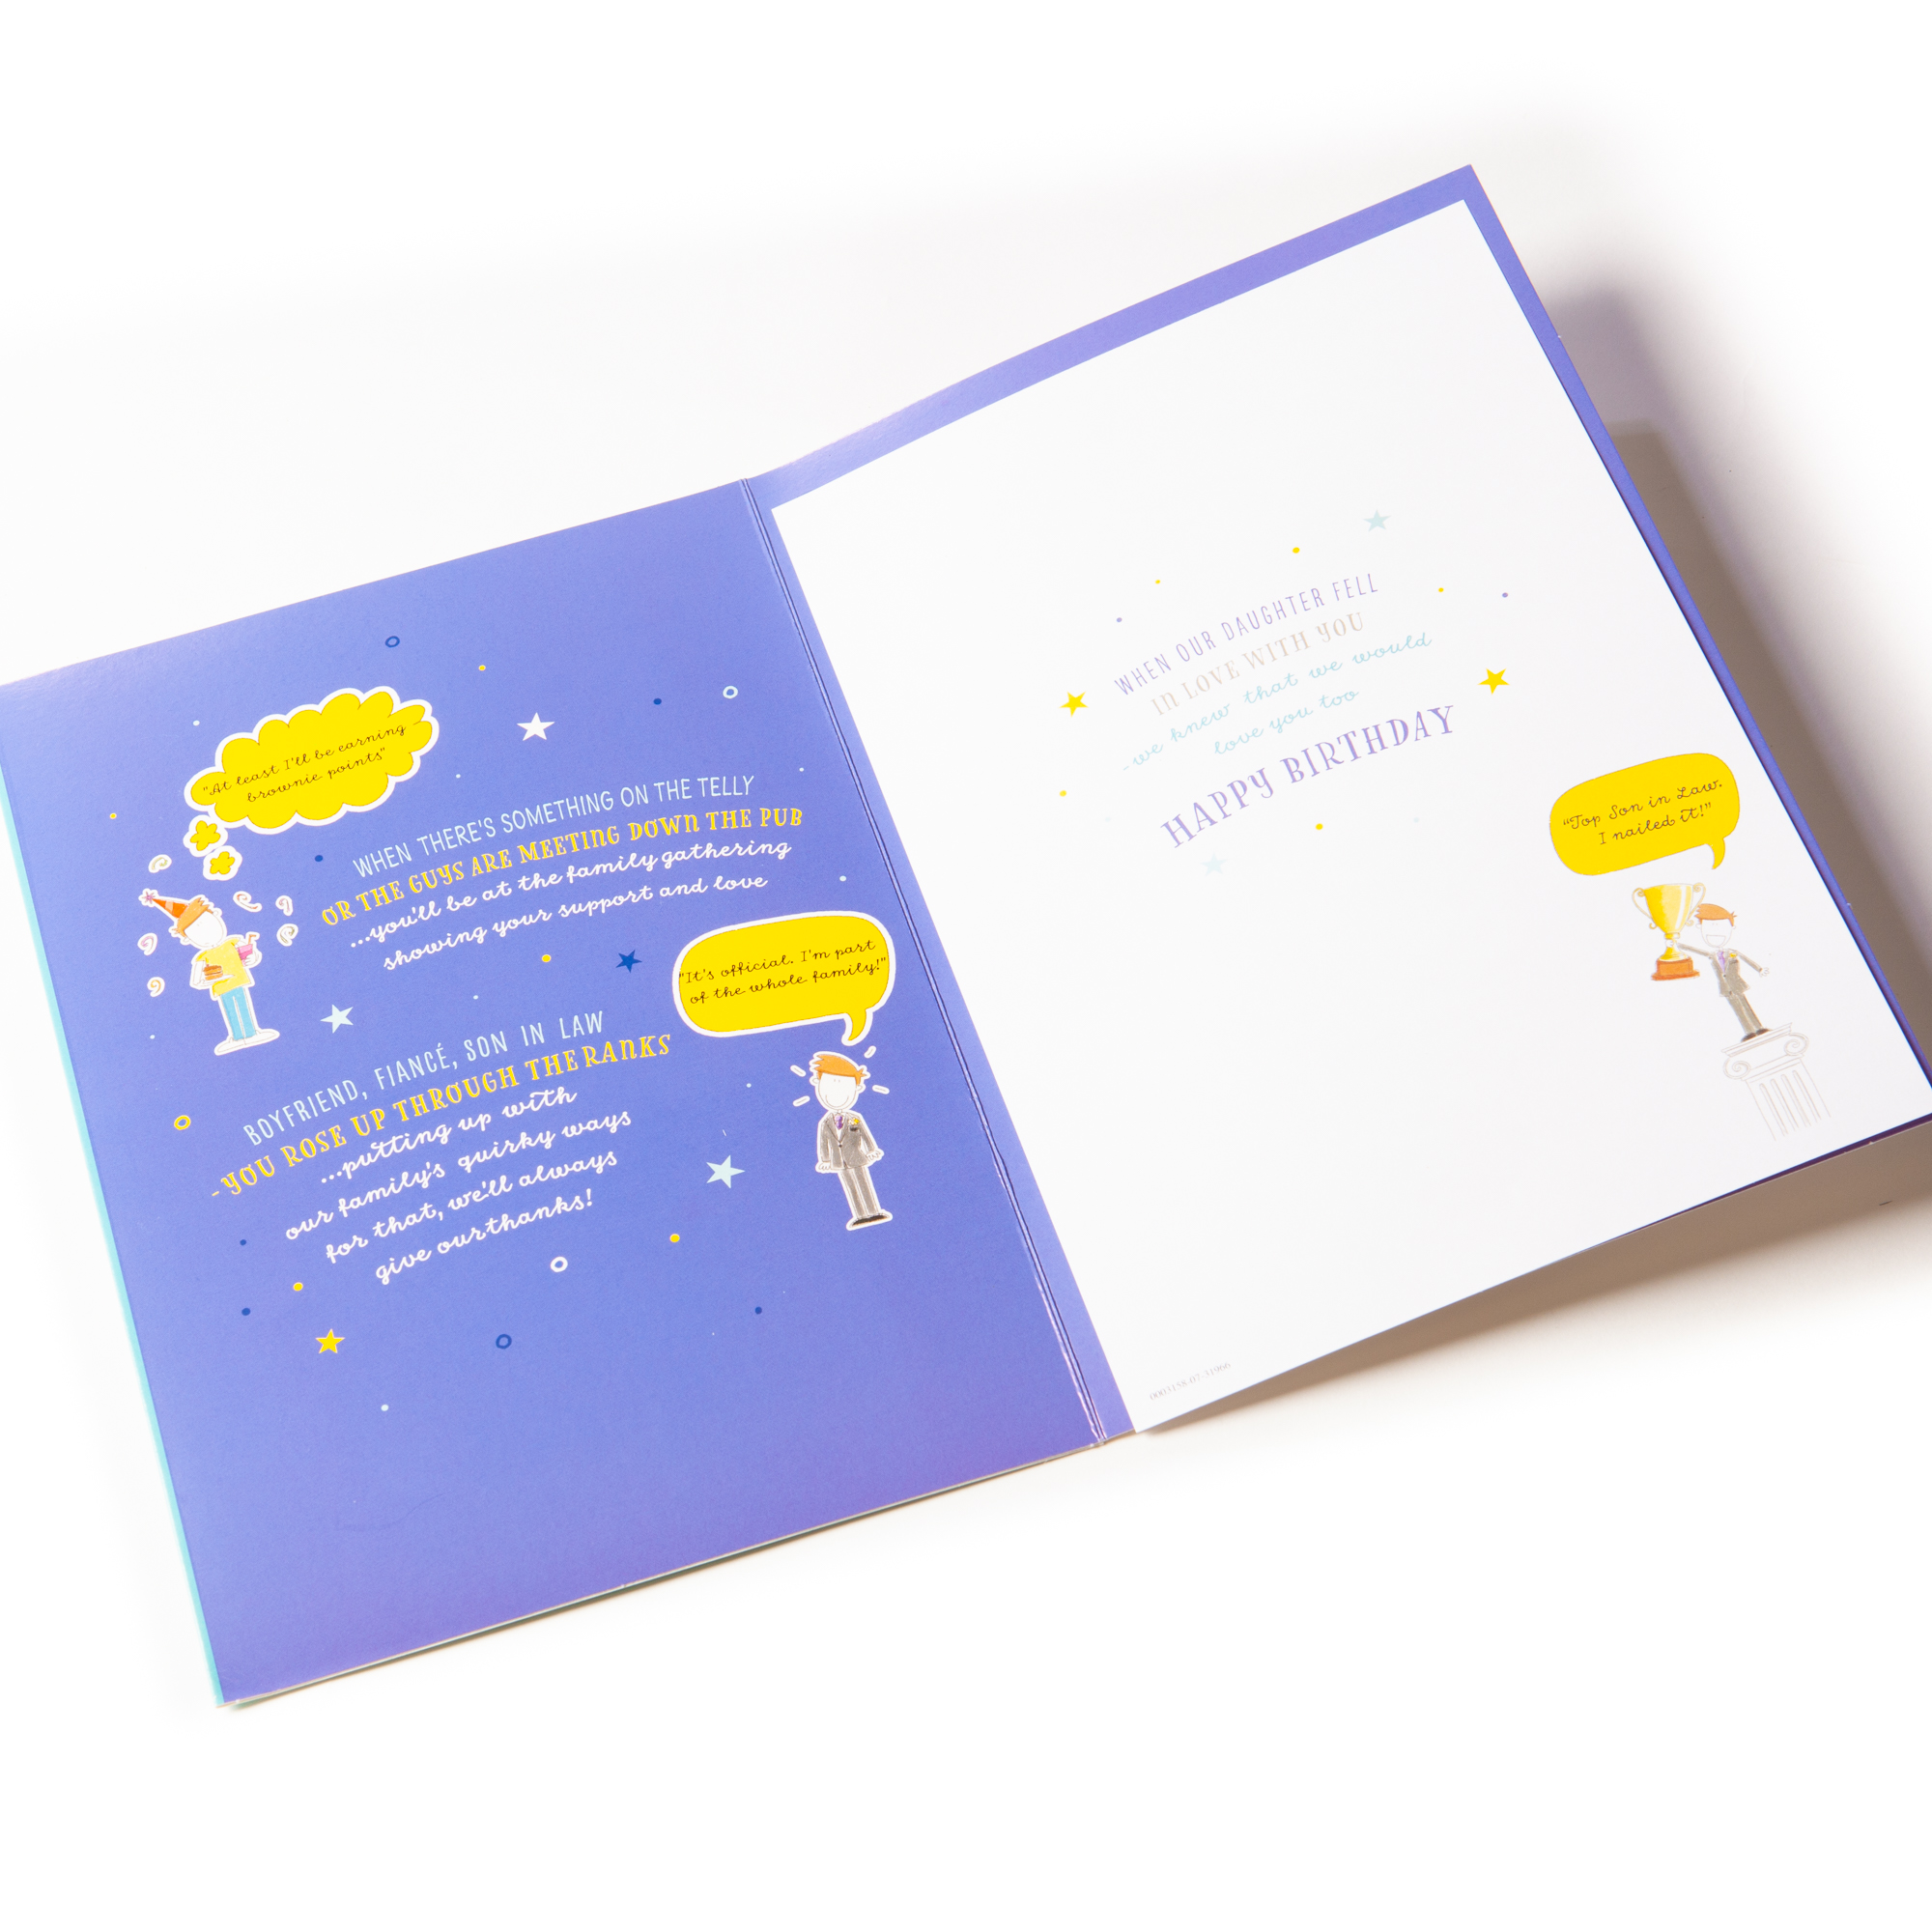 Personalised Thank You Teacher Card - Speech Bubbles